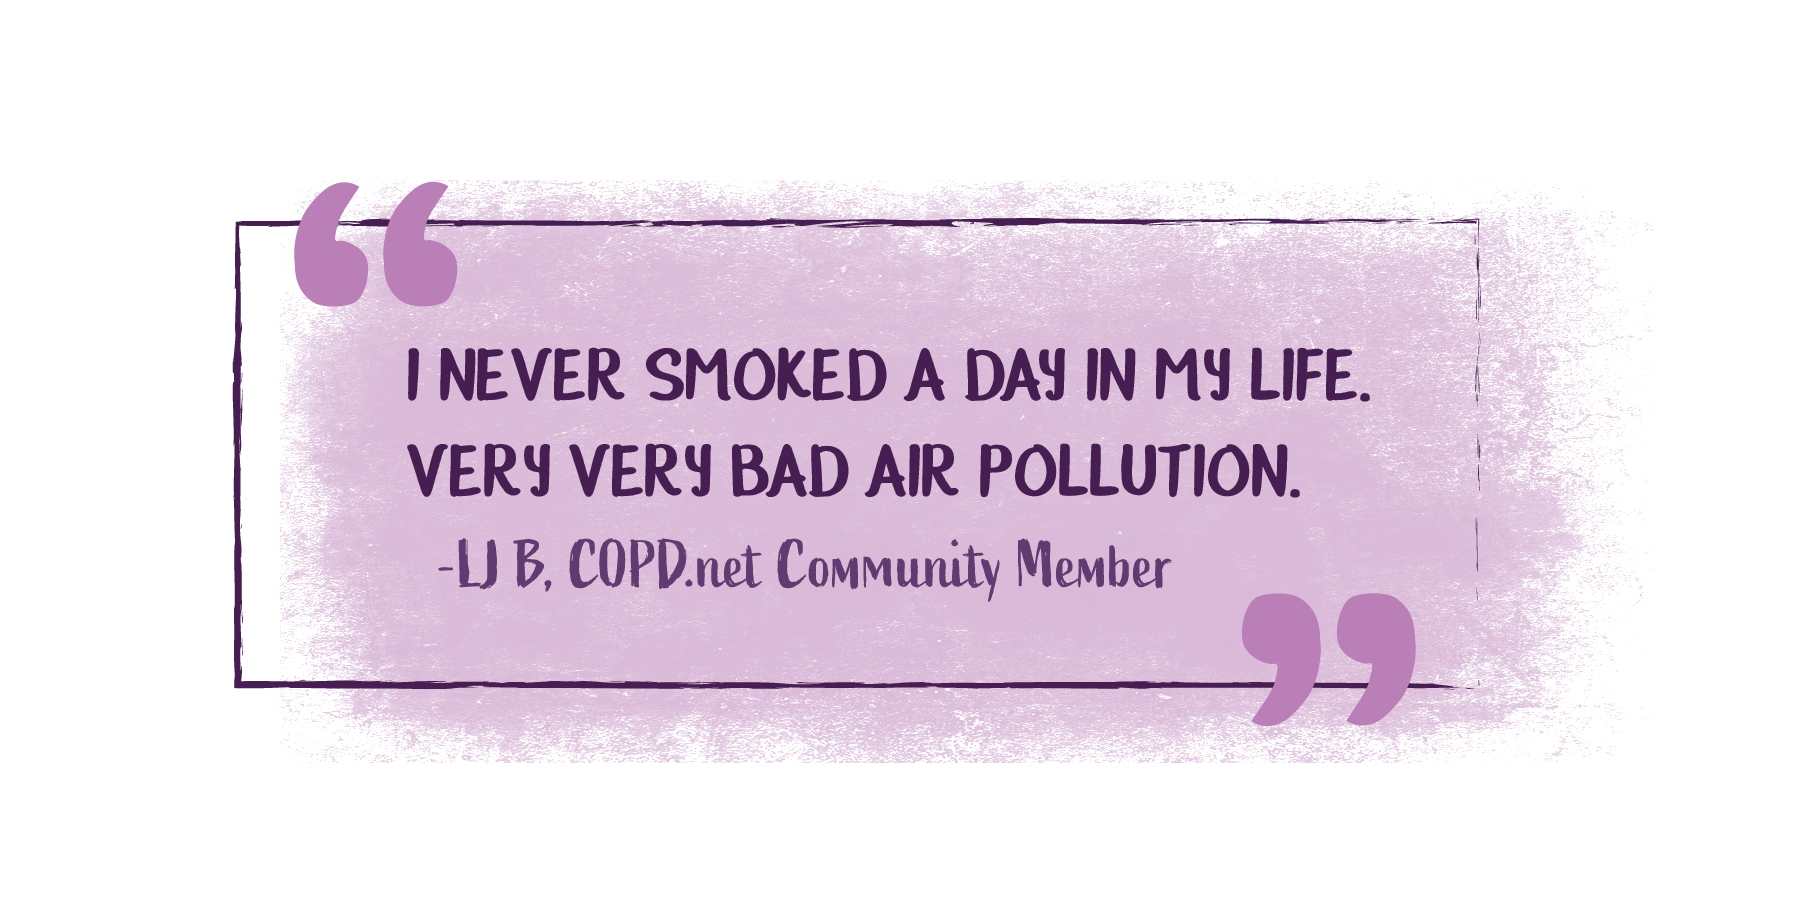 I never smoked a day in my life. Very very bad air pollution. -LJ B, COPD.net Community Member